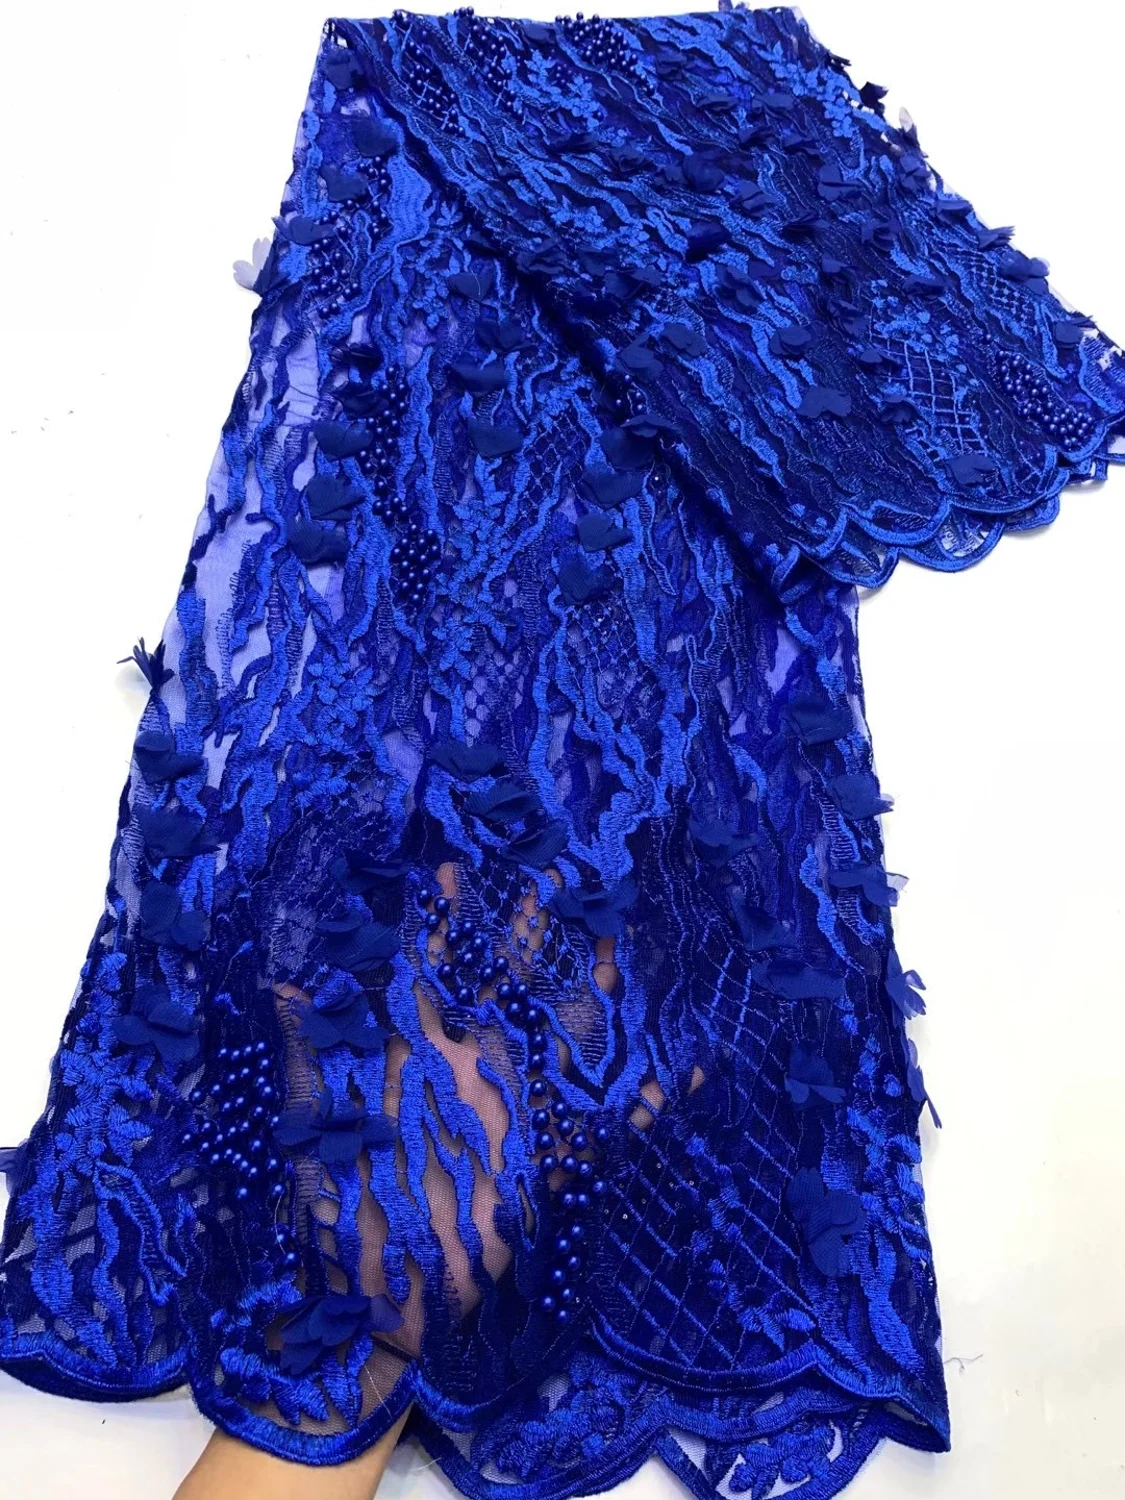 

High Quality Luxury Handmade lace embroisery African Velvet Lace Fabric Nigerian Lace Fabrics with Many stones for Dress